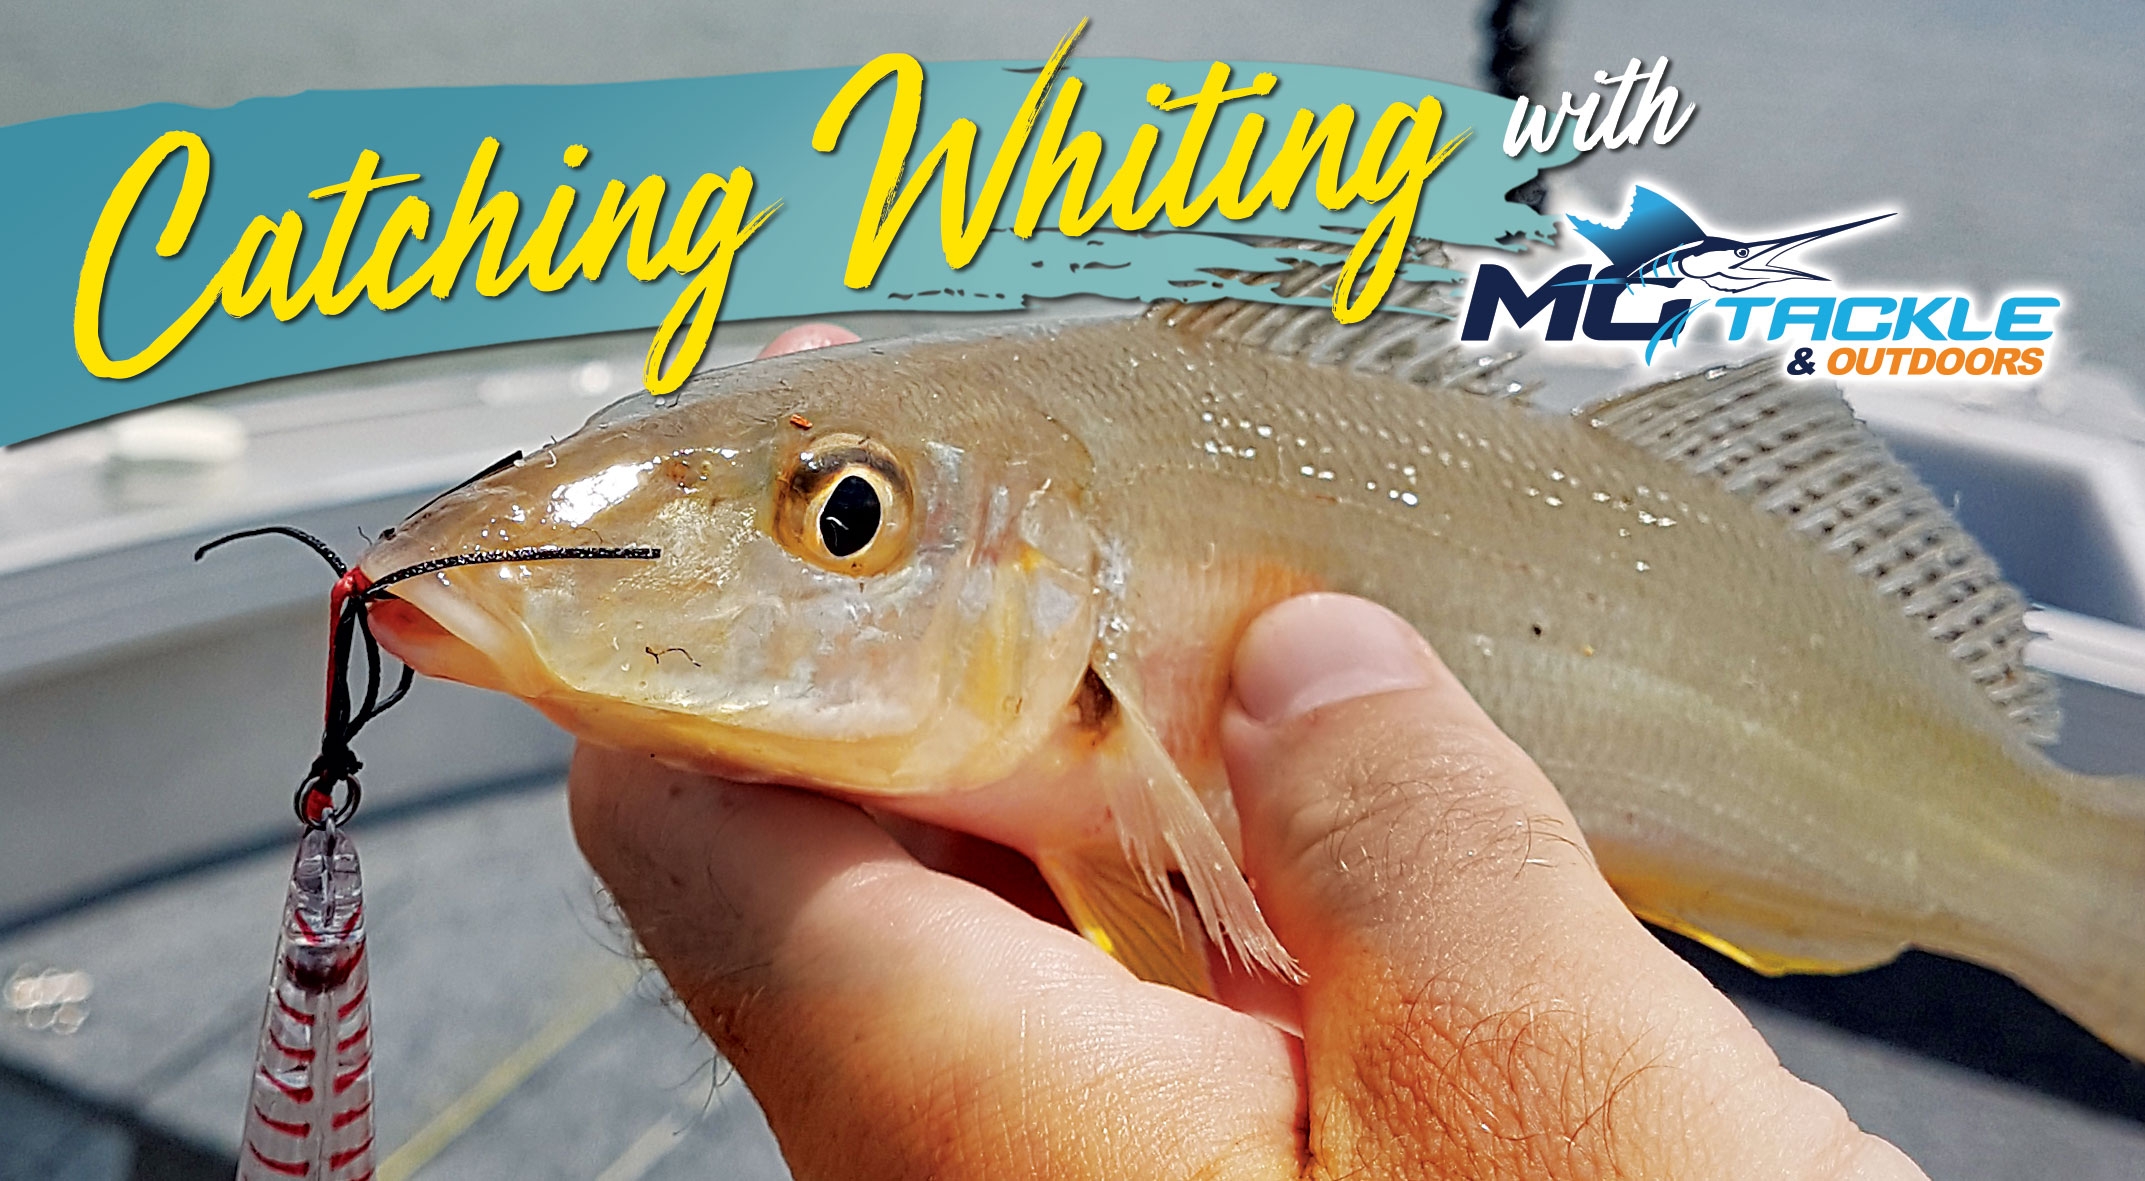 Chasing Sand Whiting With Motackle